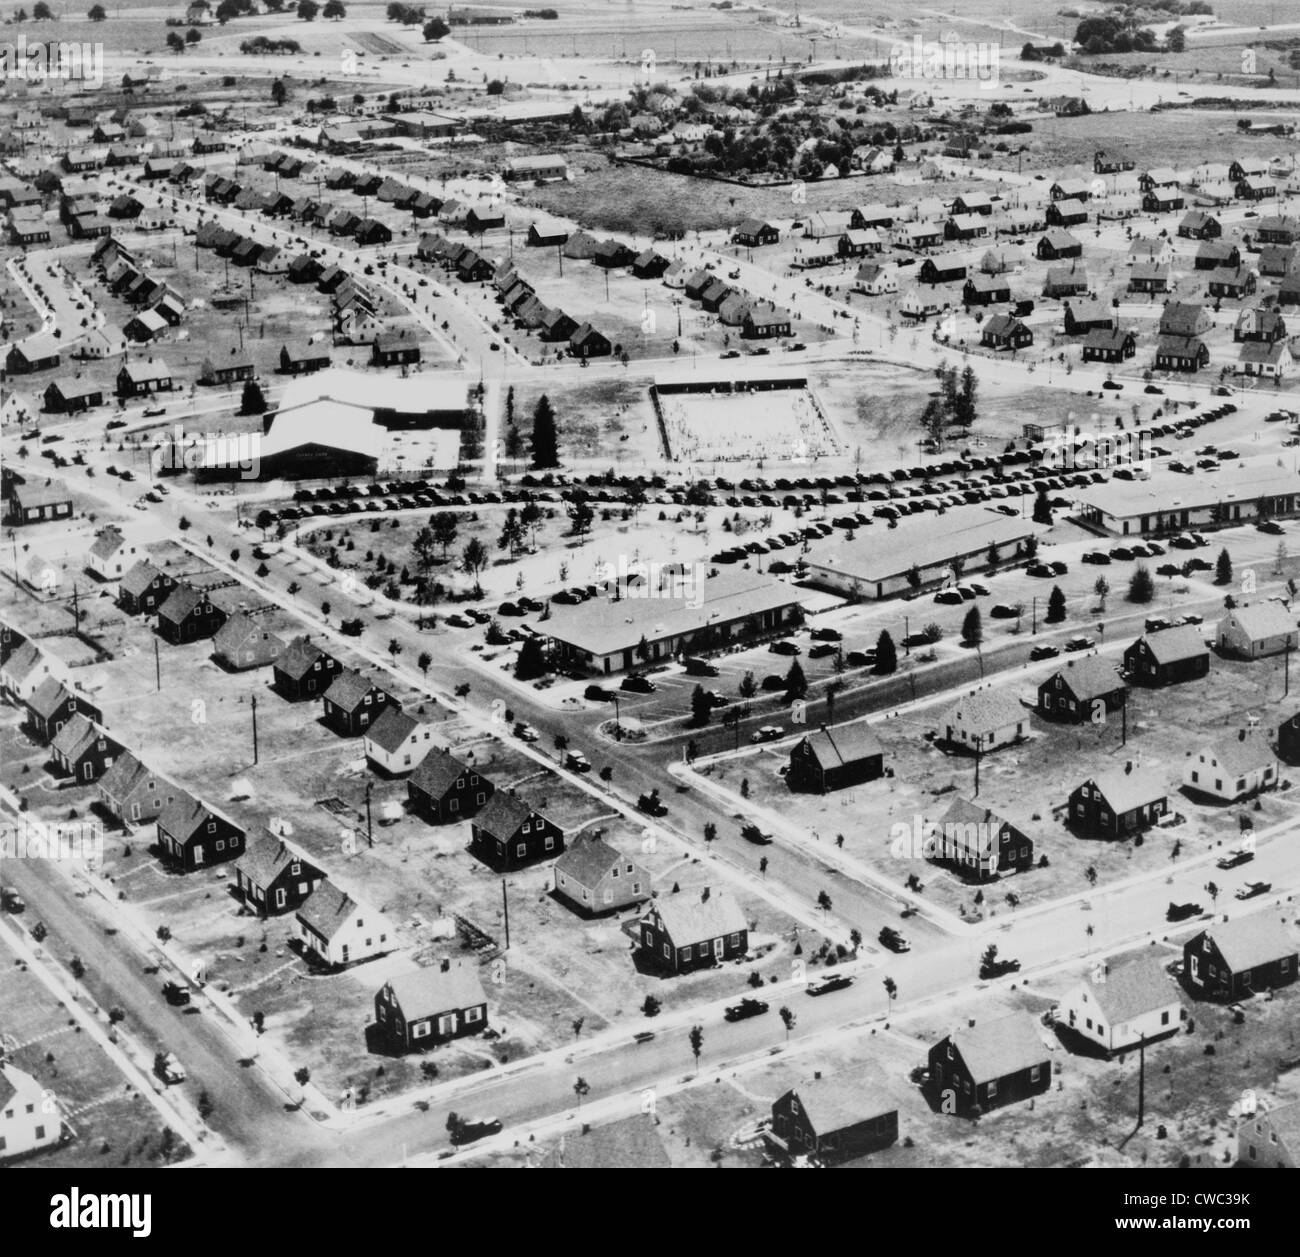 Aerial view of Levittown New York in 1953. Levittown was named after William Levitt the builder of the planned suburban Stock Photo